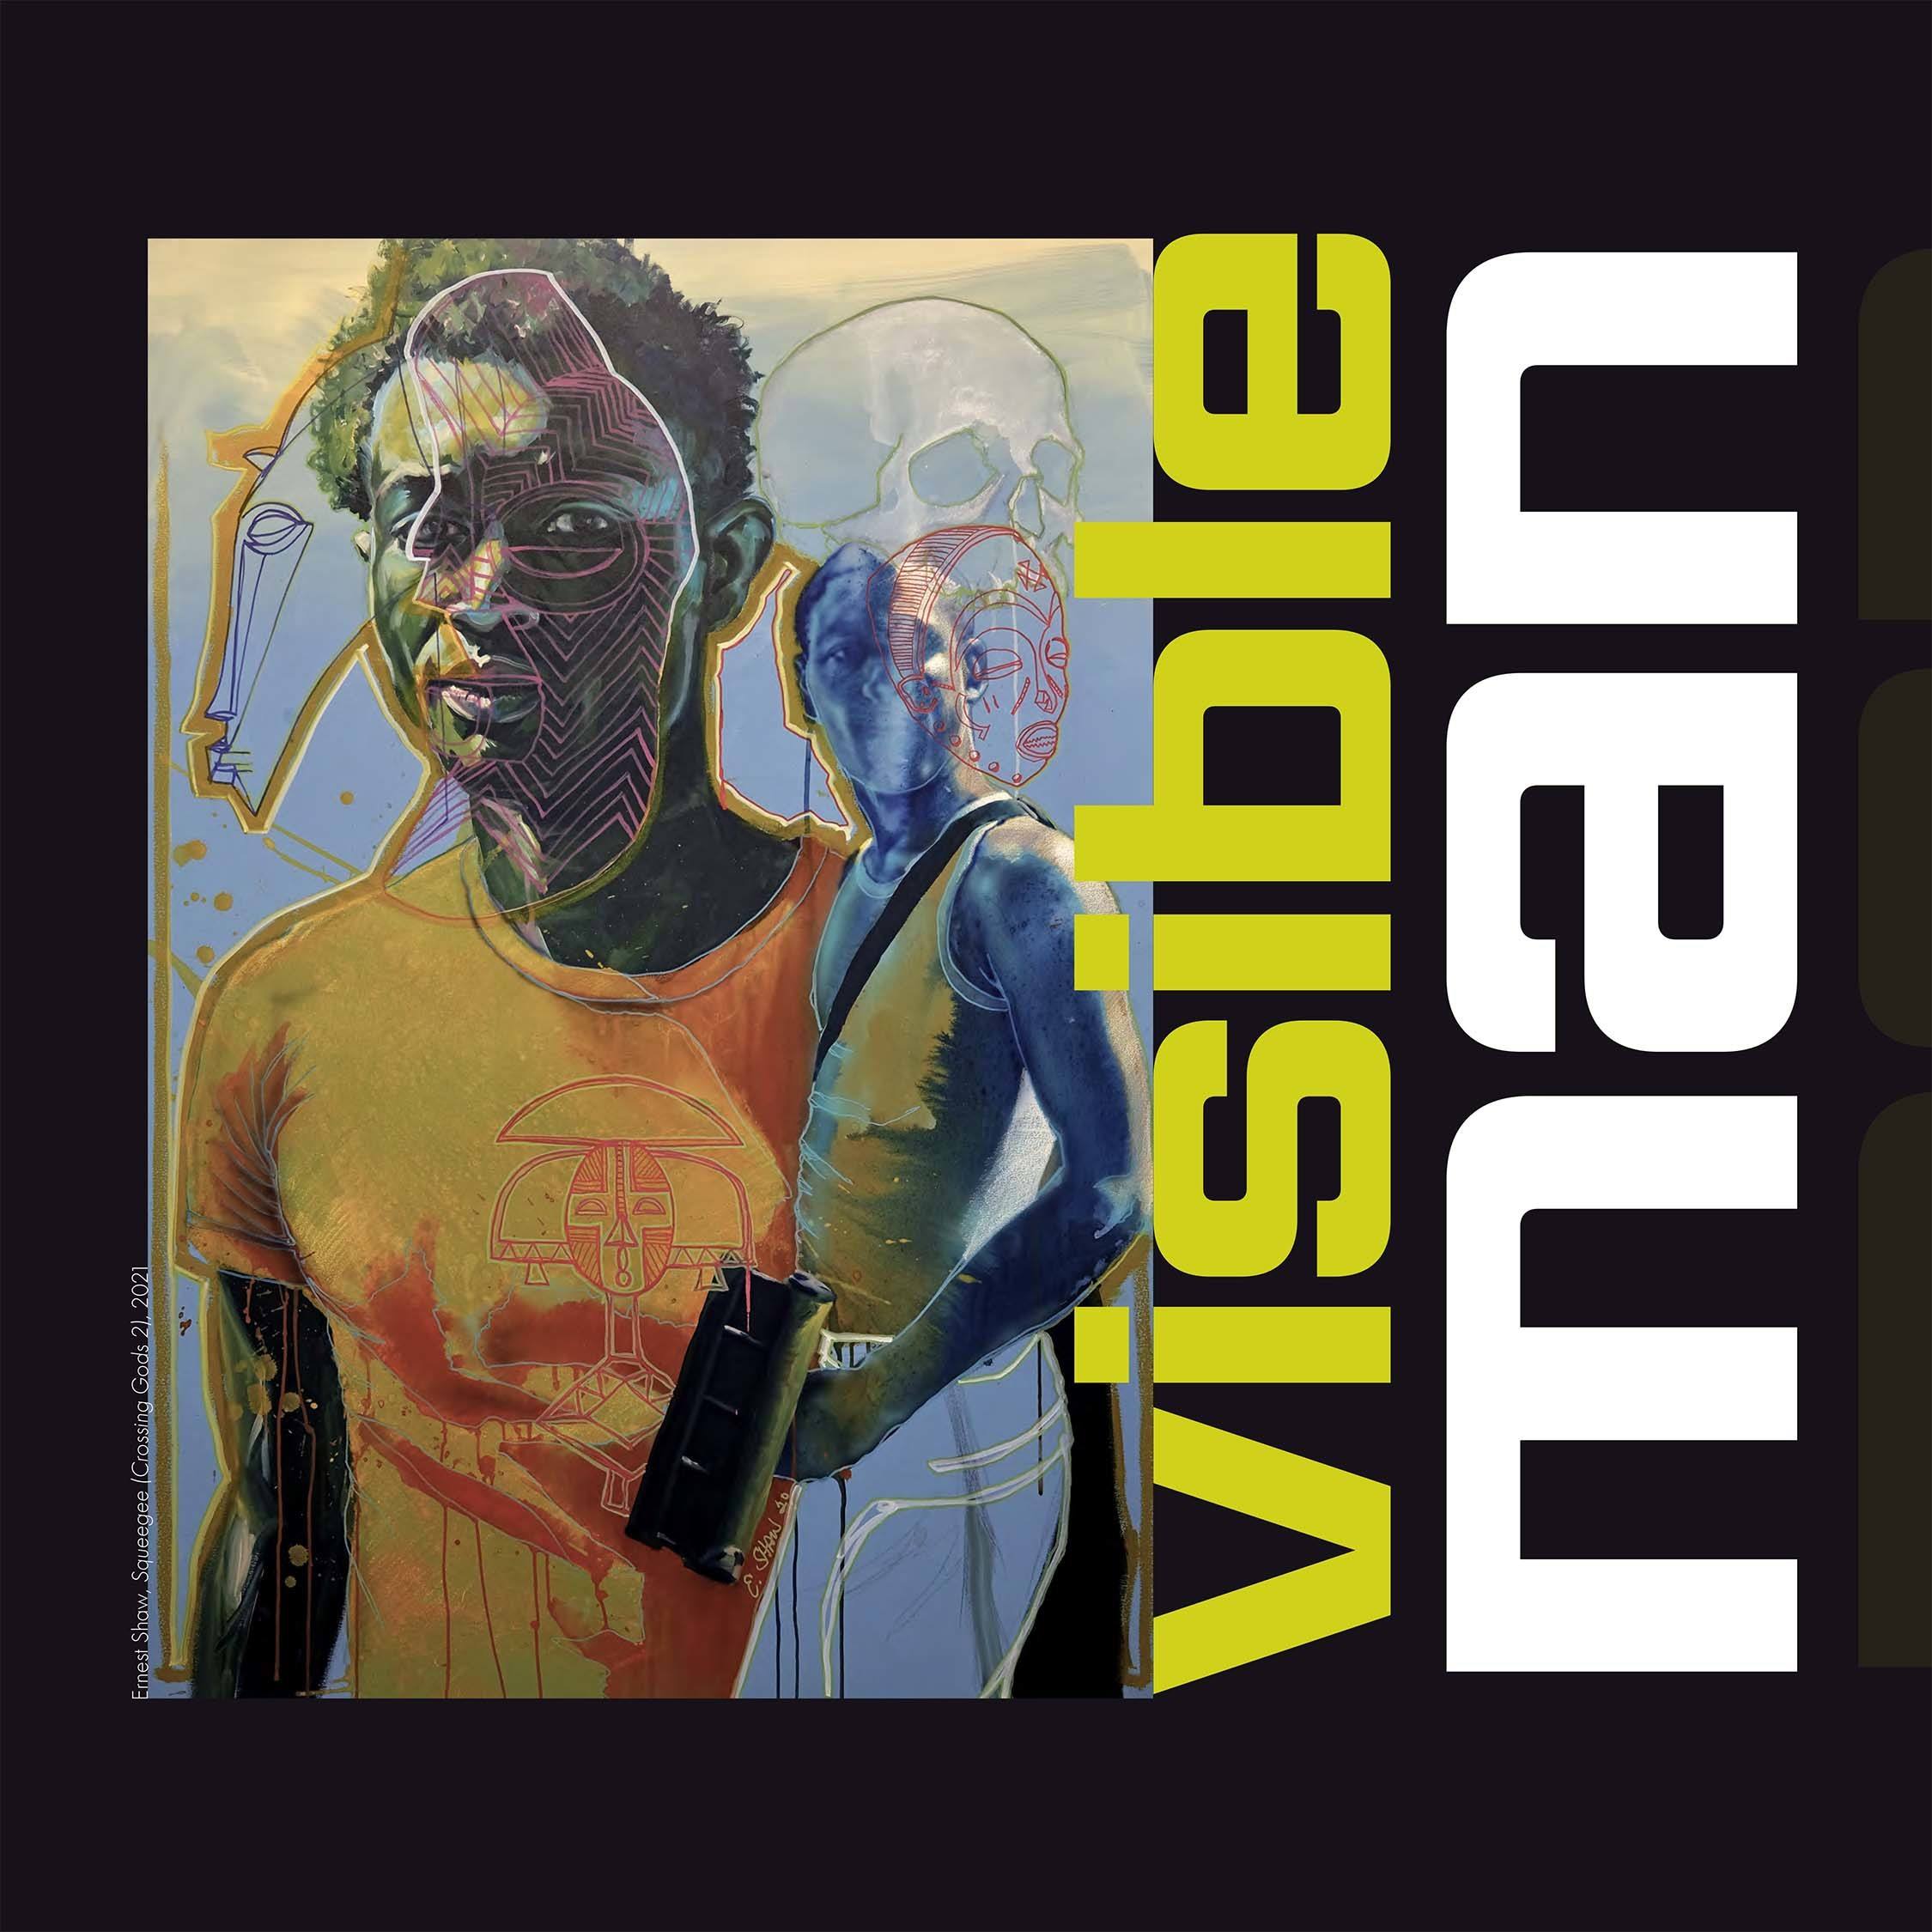 Visible Man: art and black male subjectivity